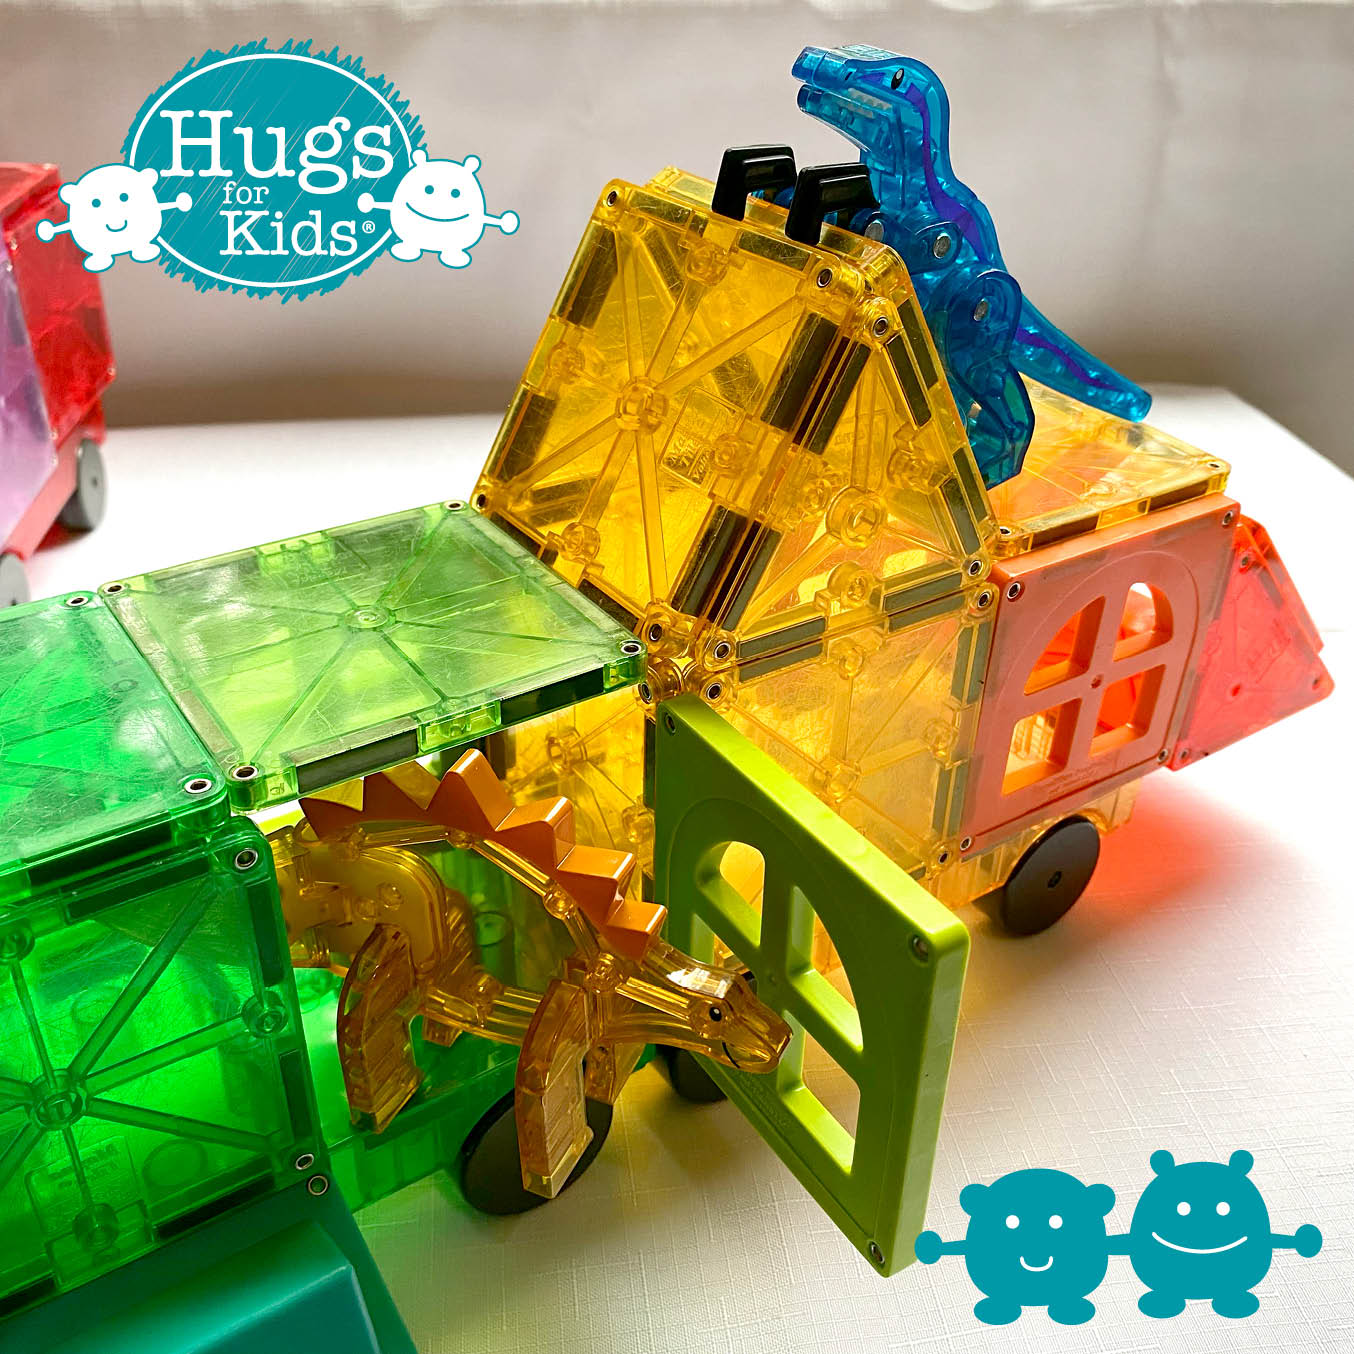 Magna-Tiles - Cars 2-Piece Expansion Set - Yellow and Green